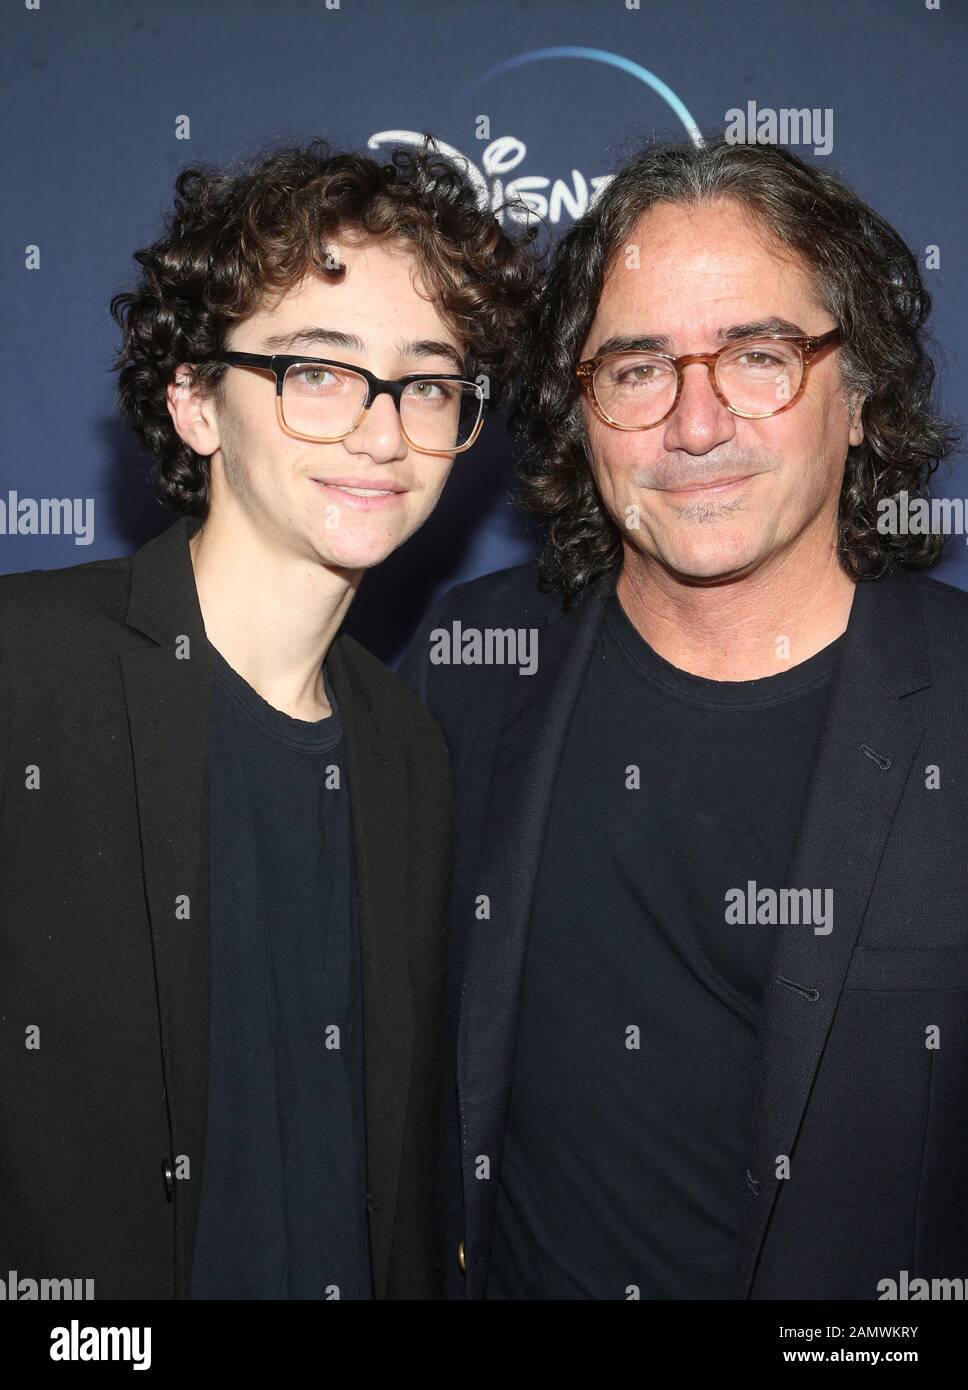 Hollywood, Ca. 14th Jan, 2020. Brad Silberling, Bodhi Russell Silberling, at the Premiere Of Disney  's 'Diary Of A Future President' at the ArcLight Cinemas in Hollywood, California on January 14, 2020. Credit: Faye Sadou/Media Punch/Alamy Live News Stock Photo